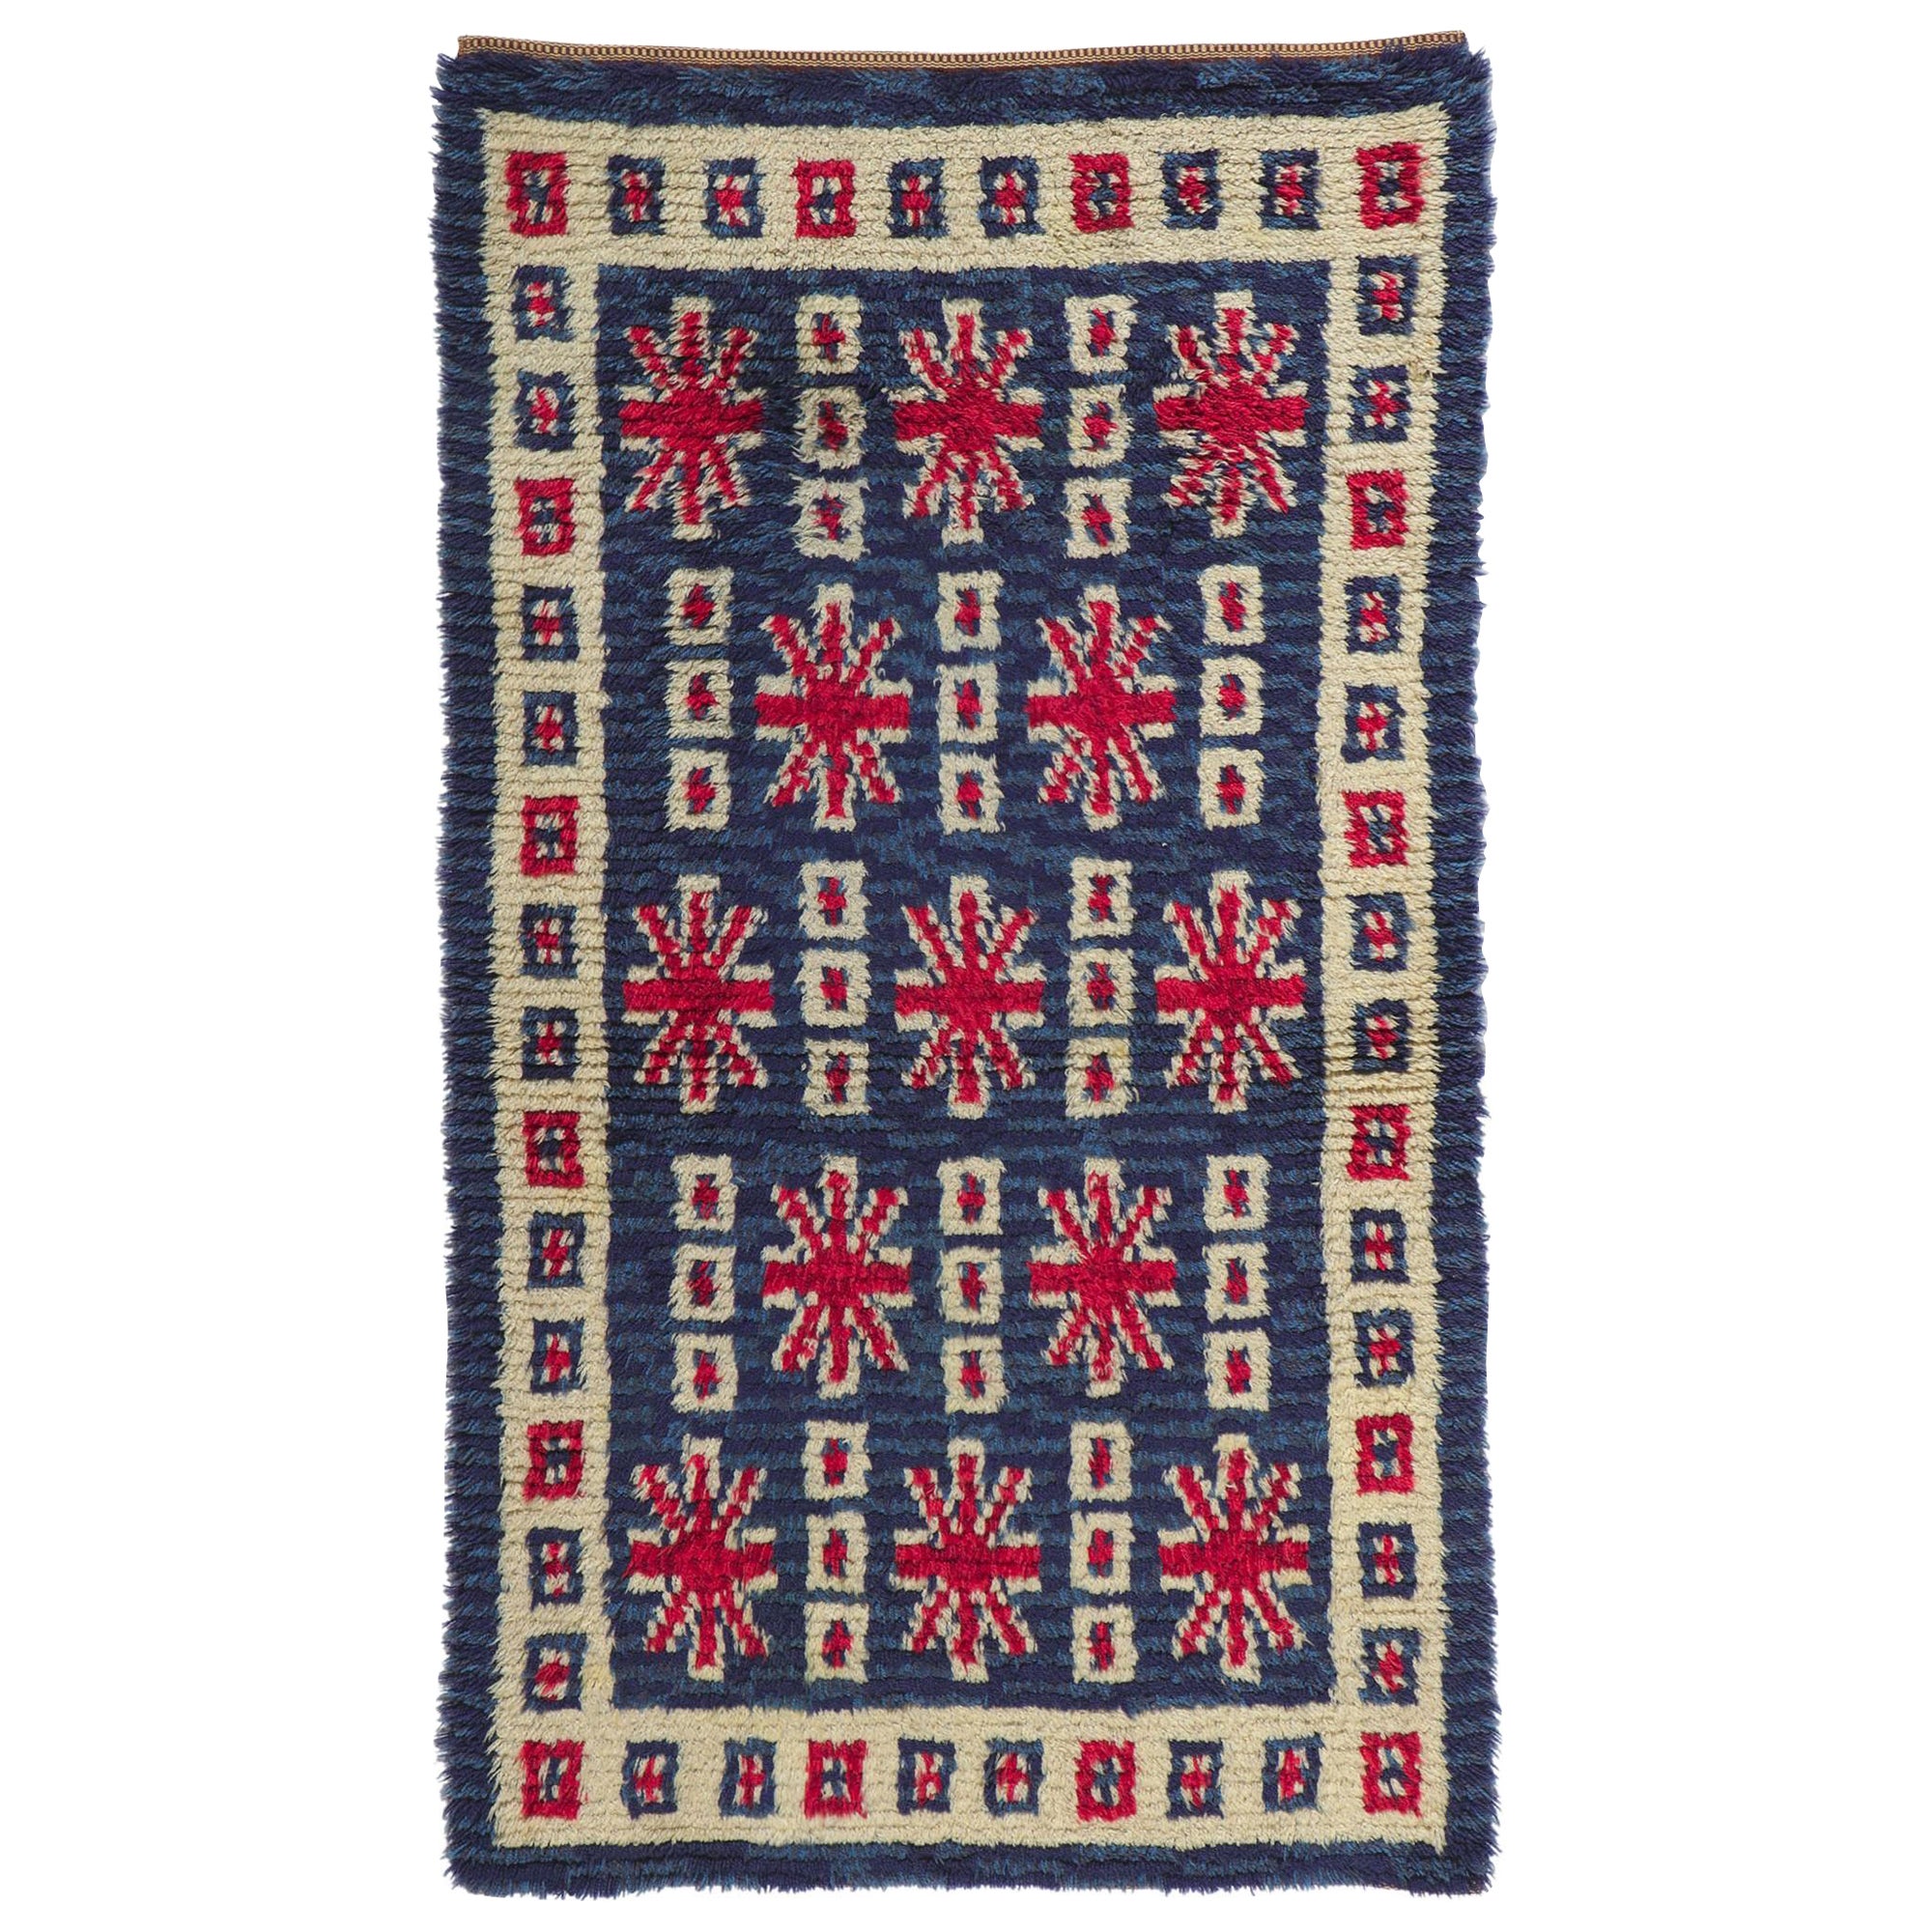 Vintage Finnish Rya Ryijy Rug with Union Jack Motifs and Cool Britannia Style For Sale